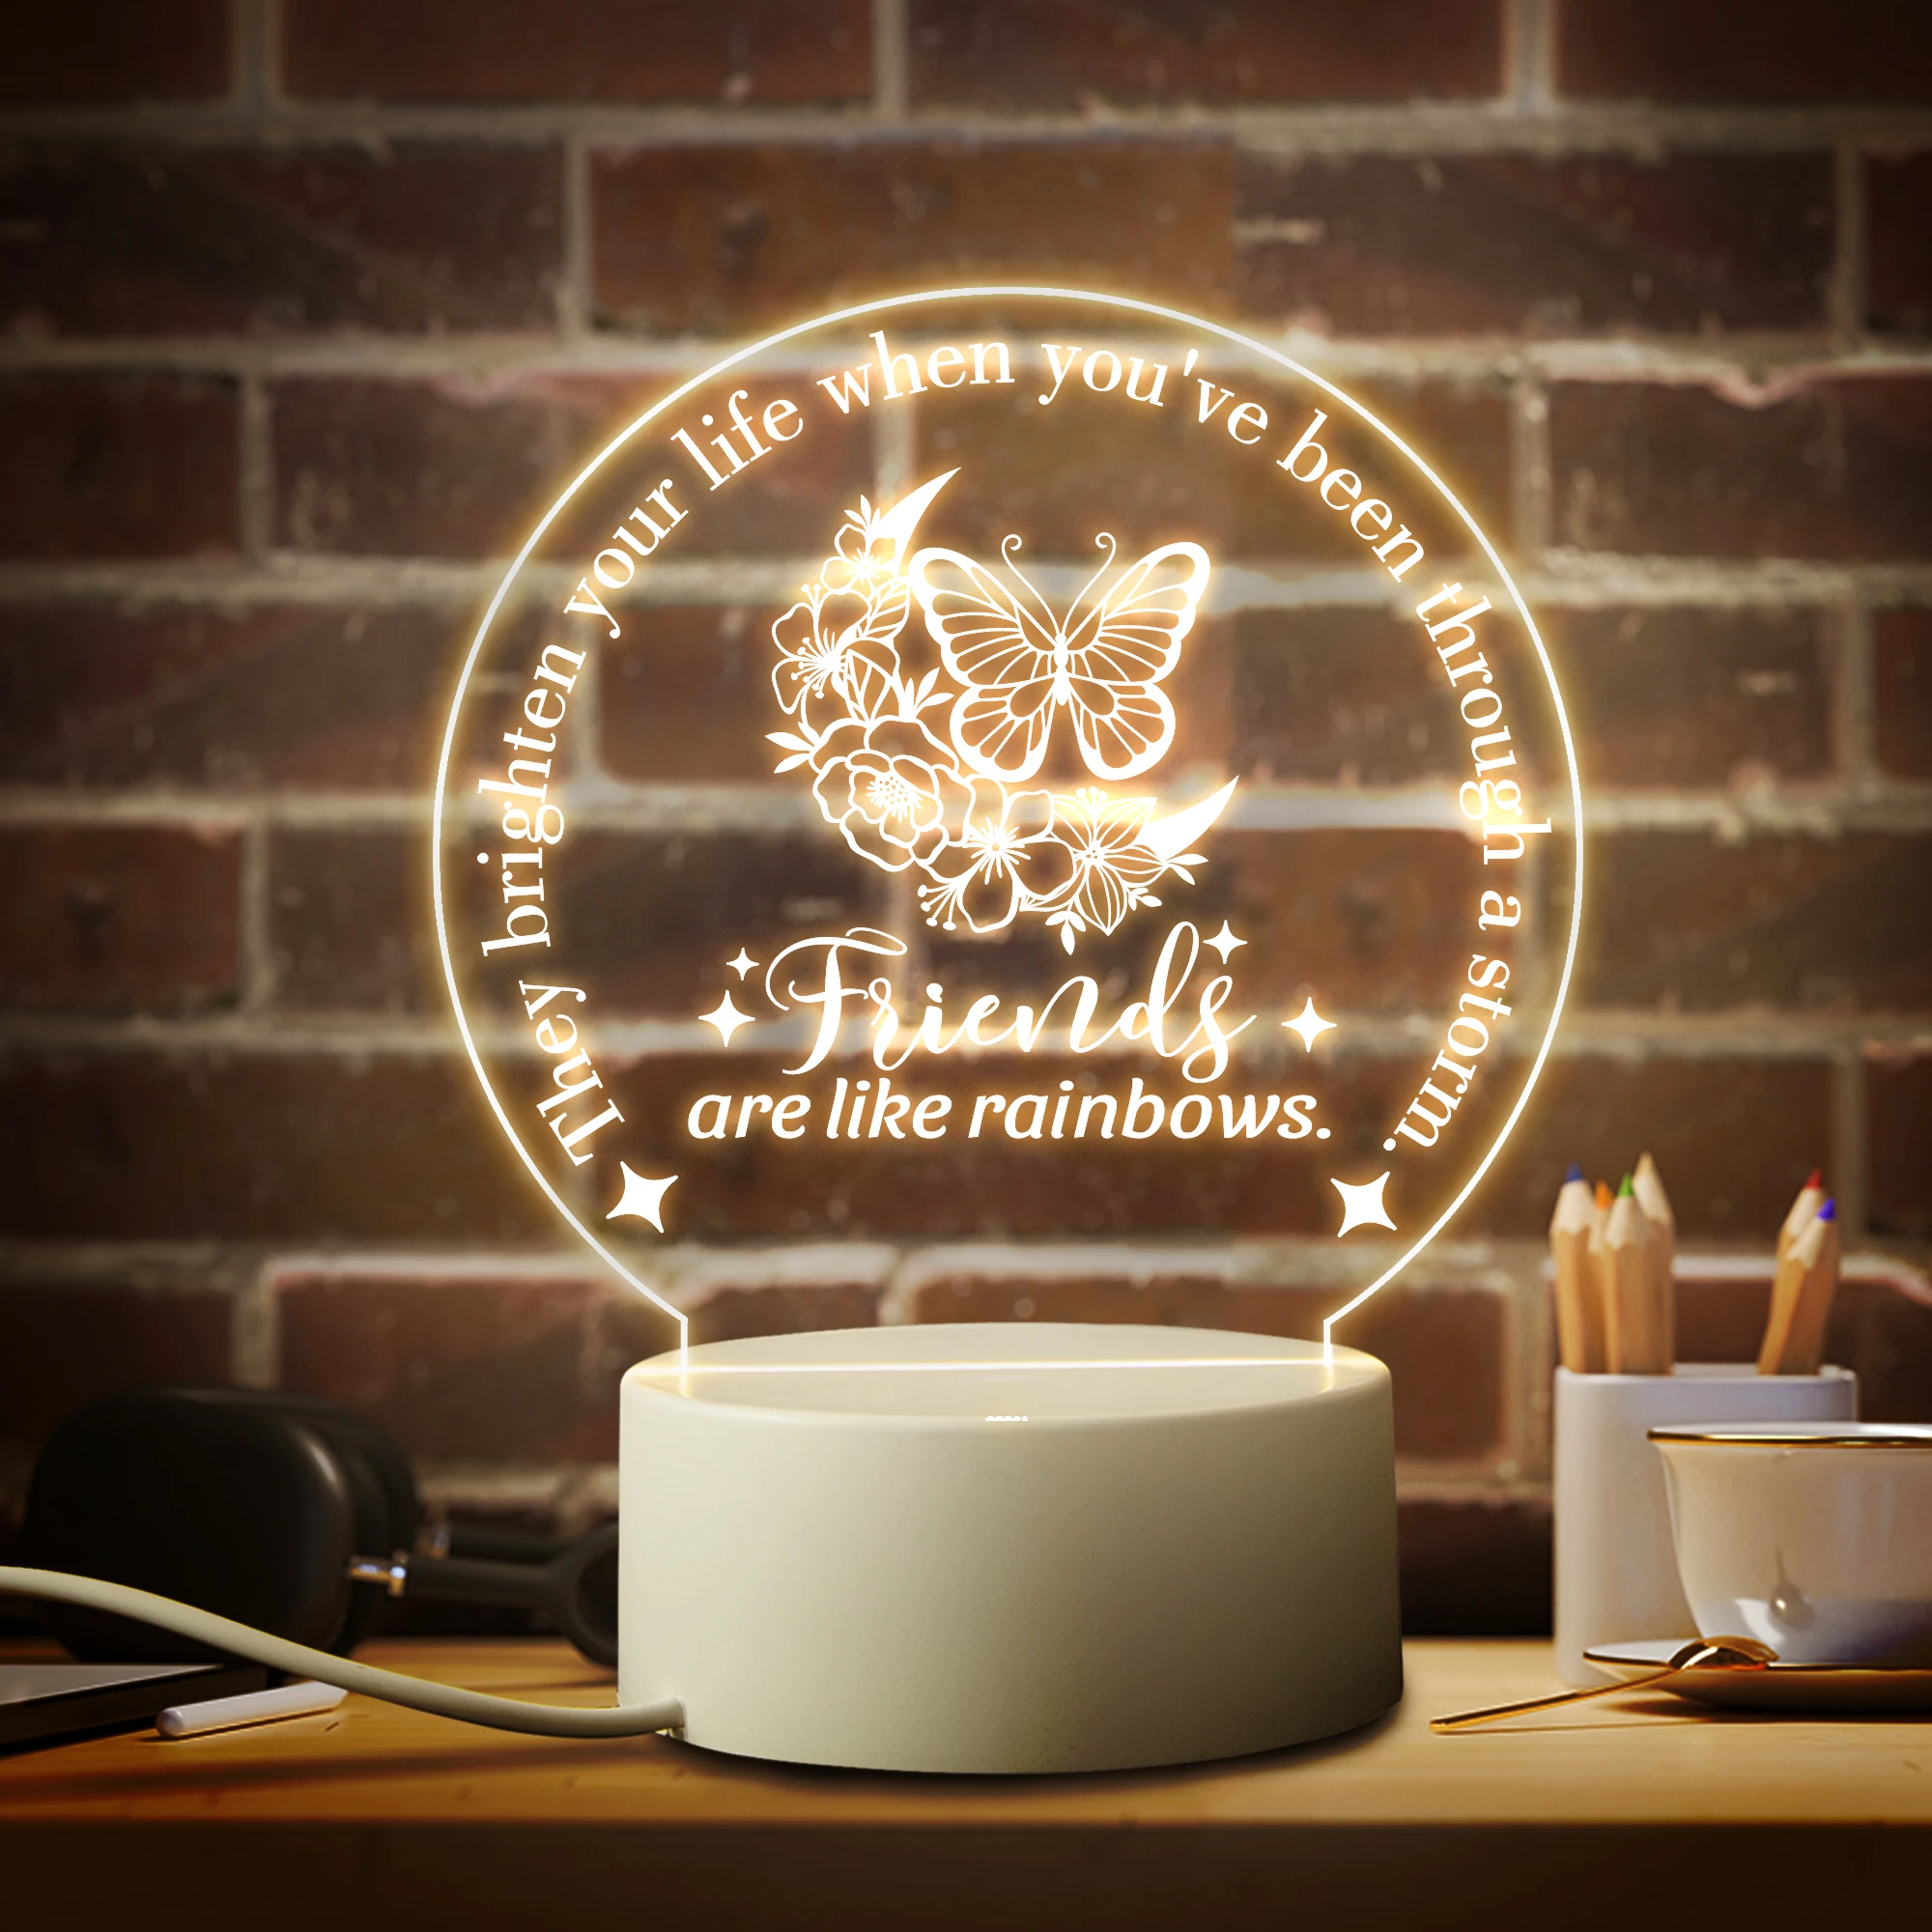 Gift for Friends 3D Lamp USB Acrylic Night Lamp Friendship Gift Nightlight Birthday Christmas Gift for Bedroom Decorations